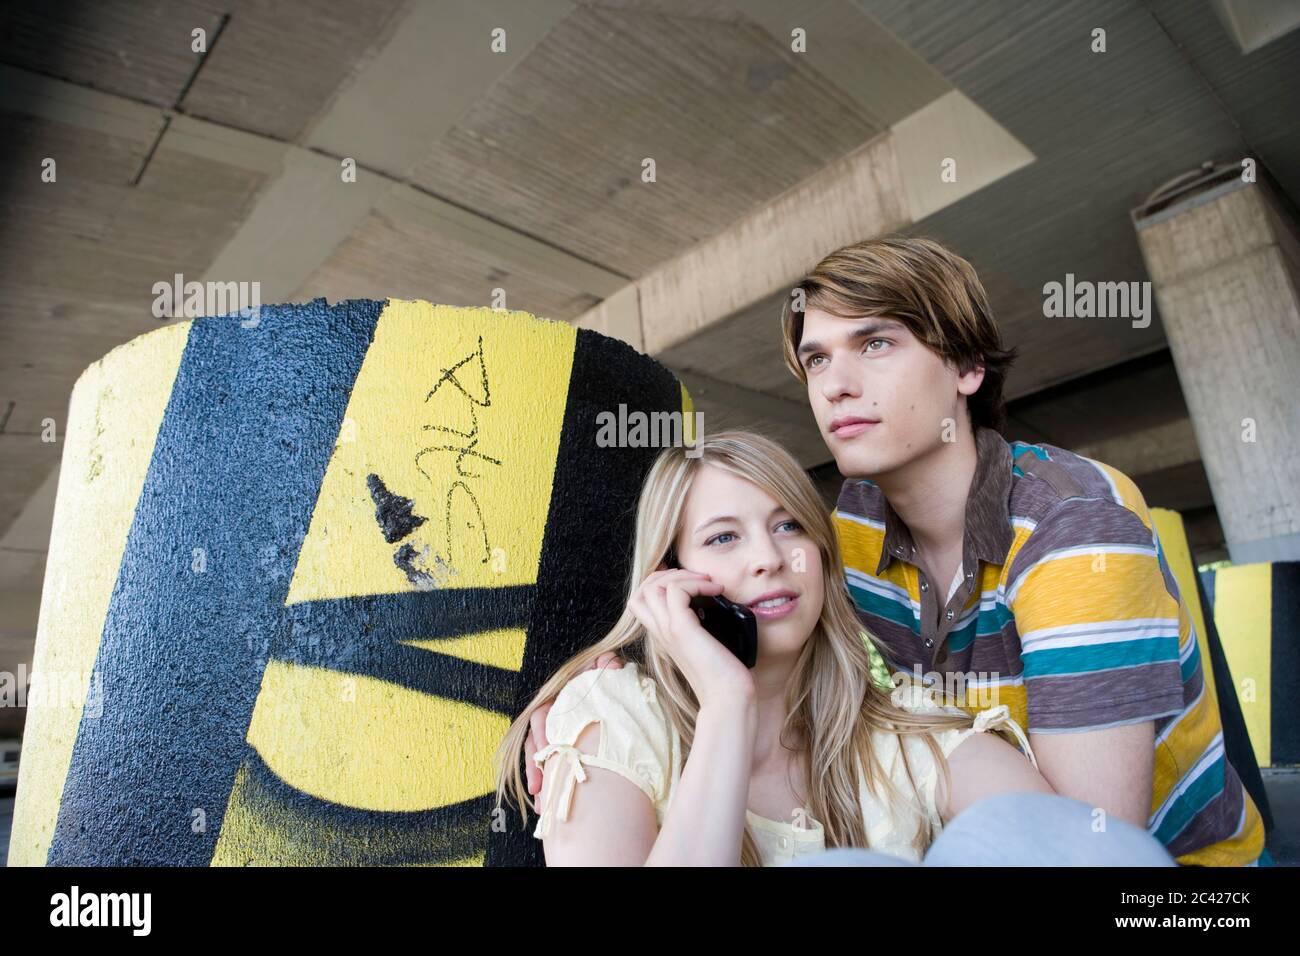 Young brunette man in a striped shirt behind a blonde woman who is on the phone - youth relationship Stock Photo